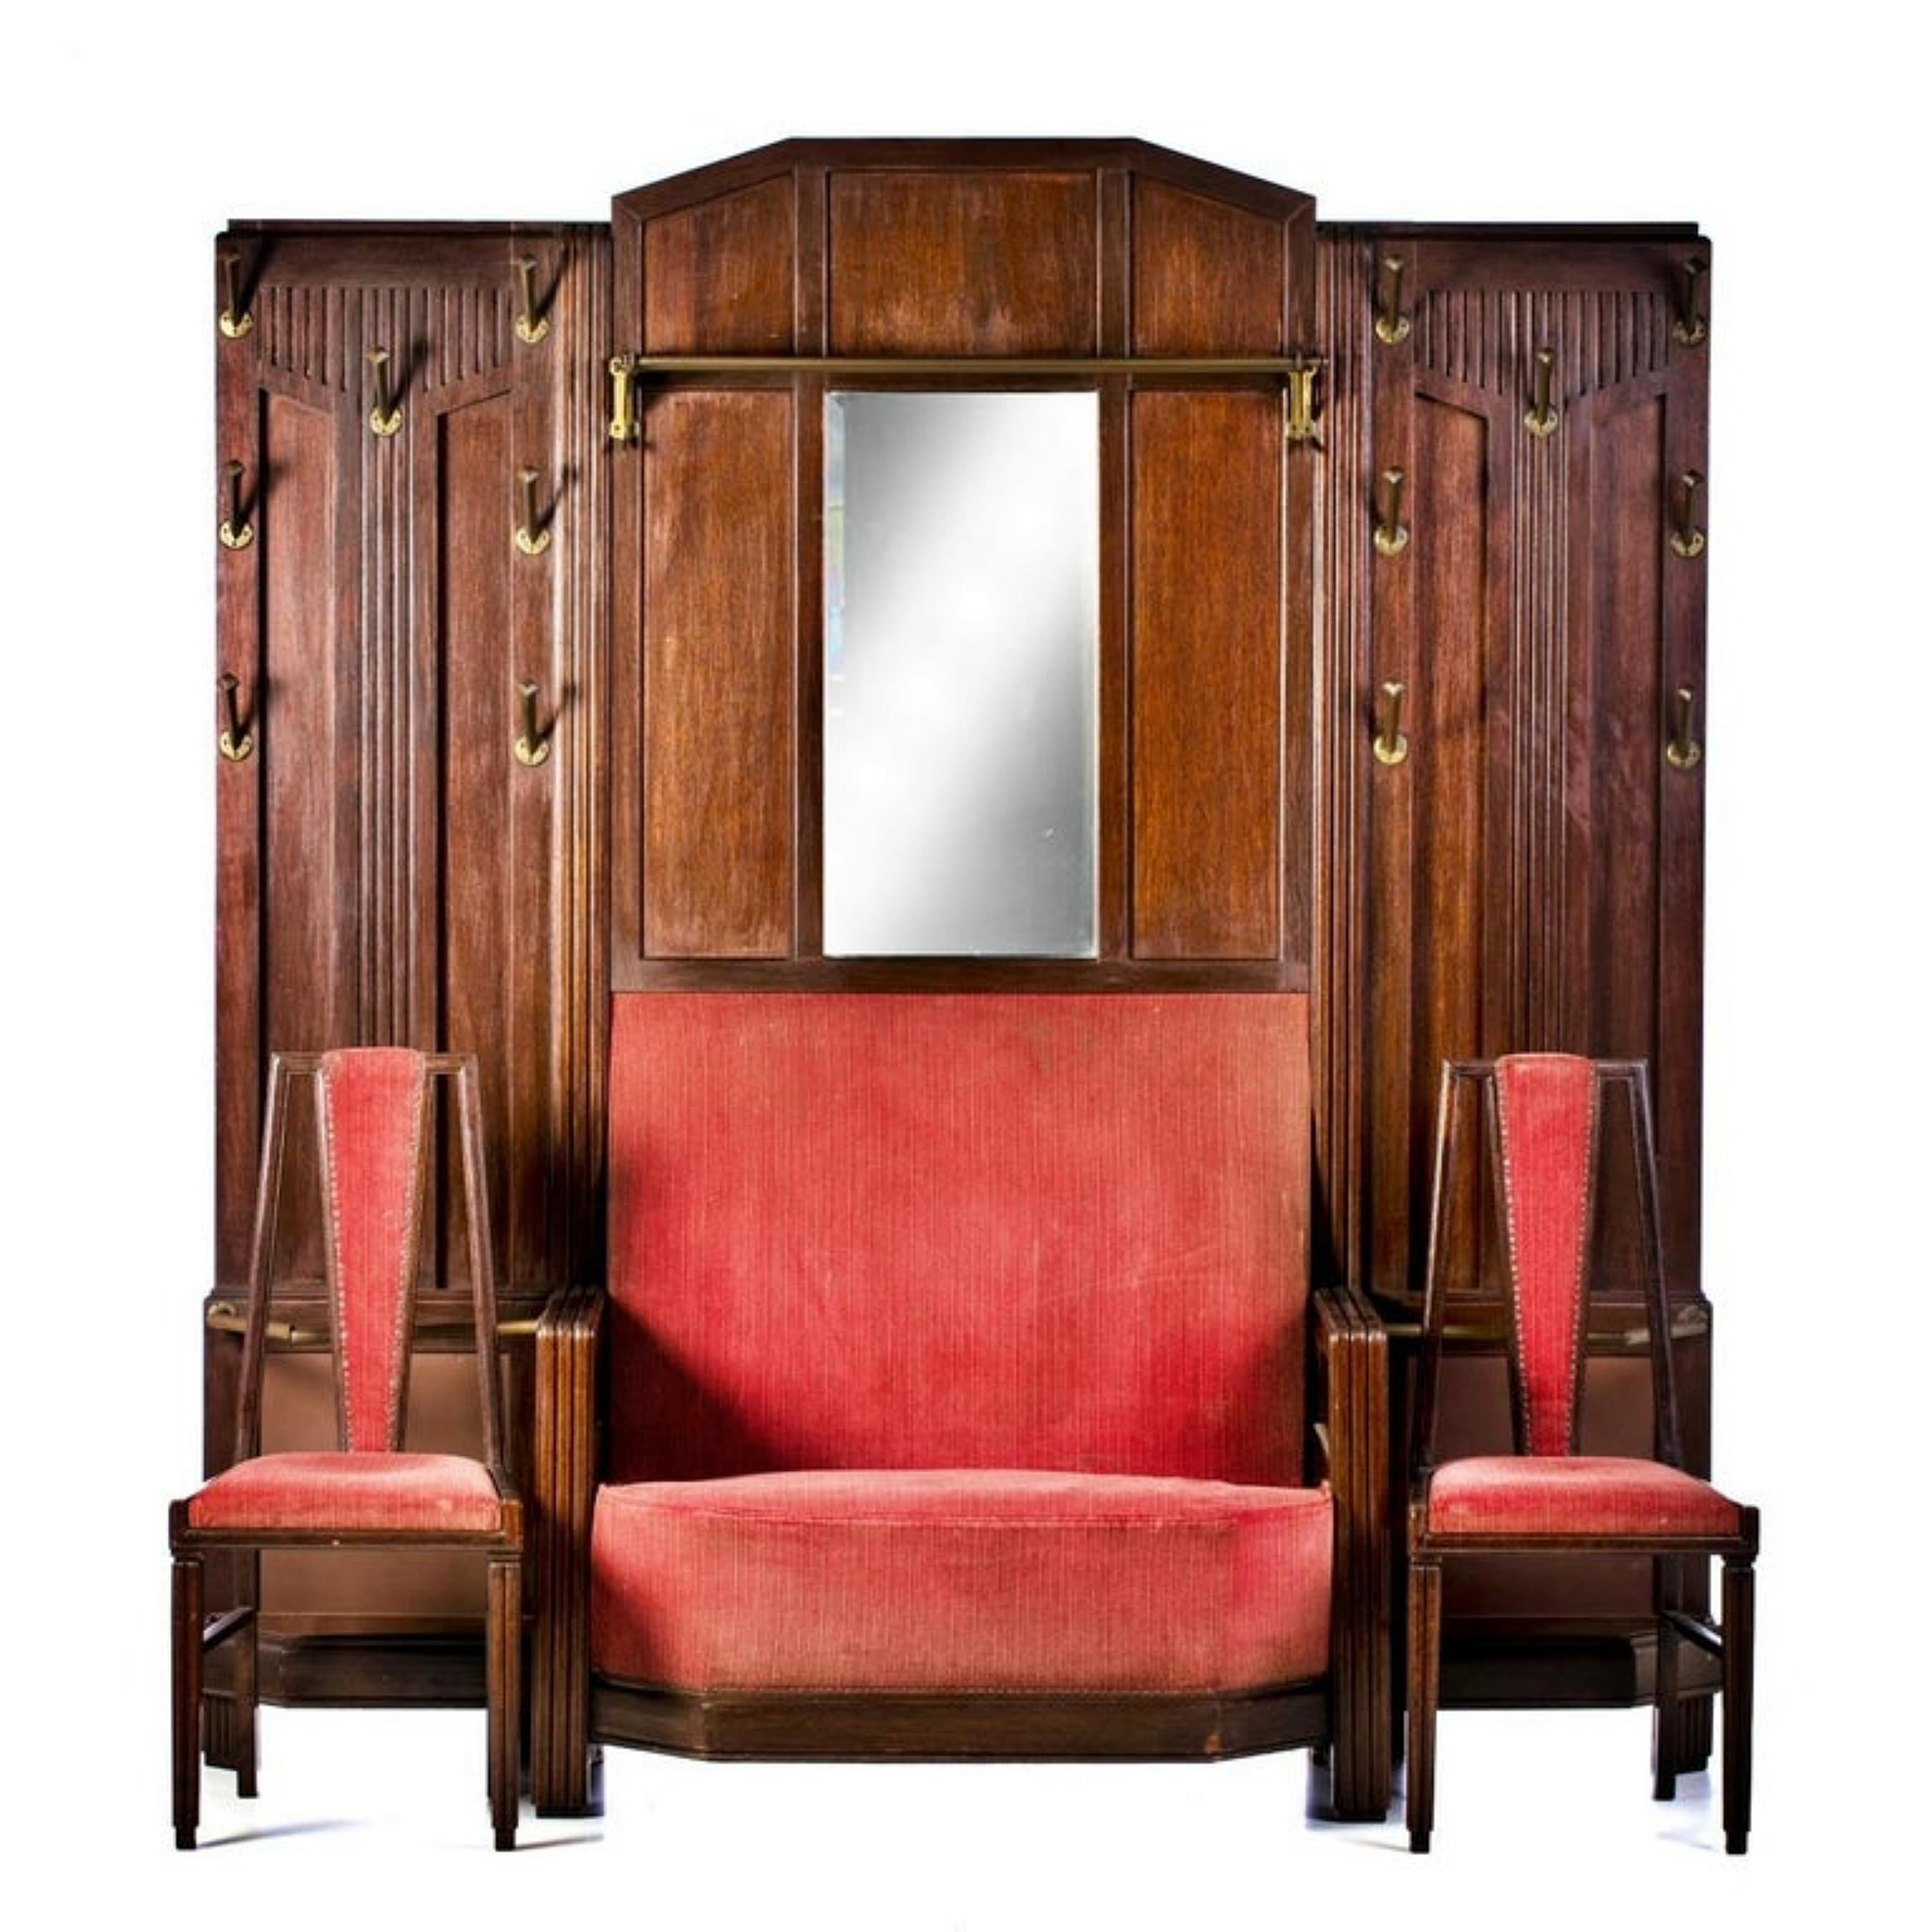 Cloakroom Art Deco sofa.
In mahogany, with mirror in the center and sofa in metal applications. Signs of use.
Dim:: (larger) 205 x 197 x 60 cm.
Good conditions.